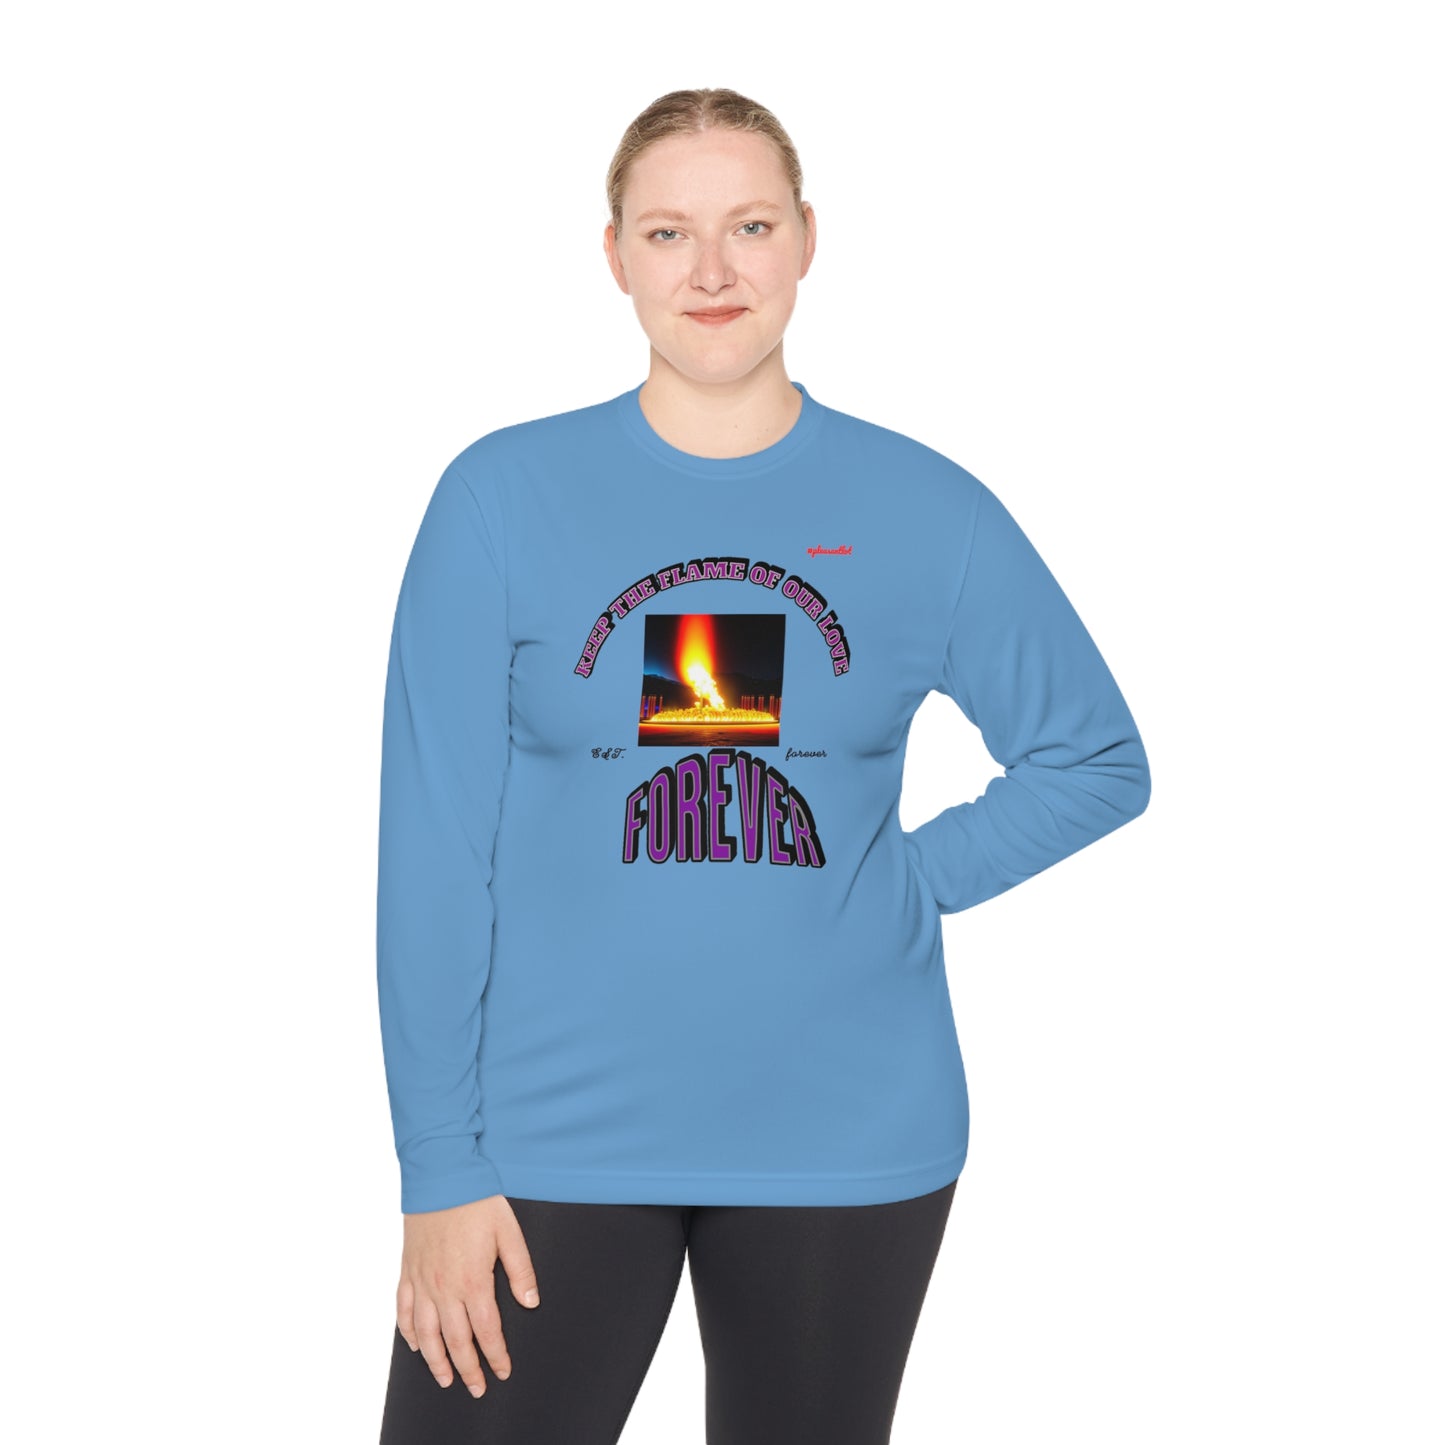 Moisture wicking Unisex Lightweight Long Sleeve Tee-(Keep The Flame Of Our Love Forever)